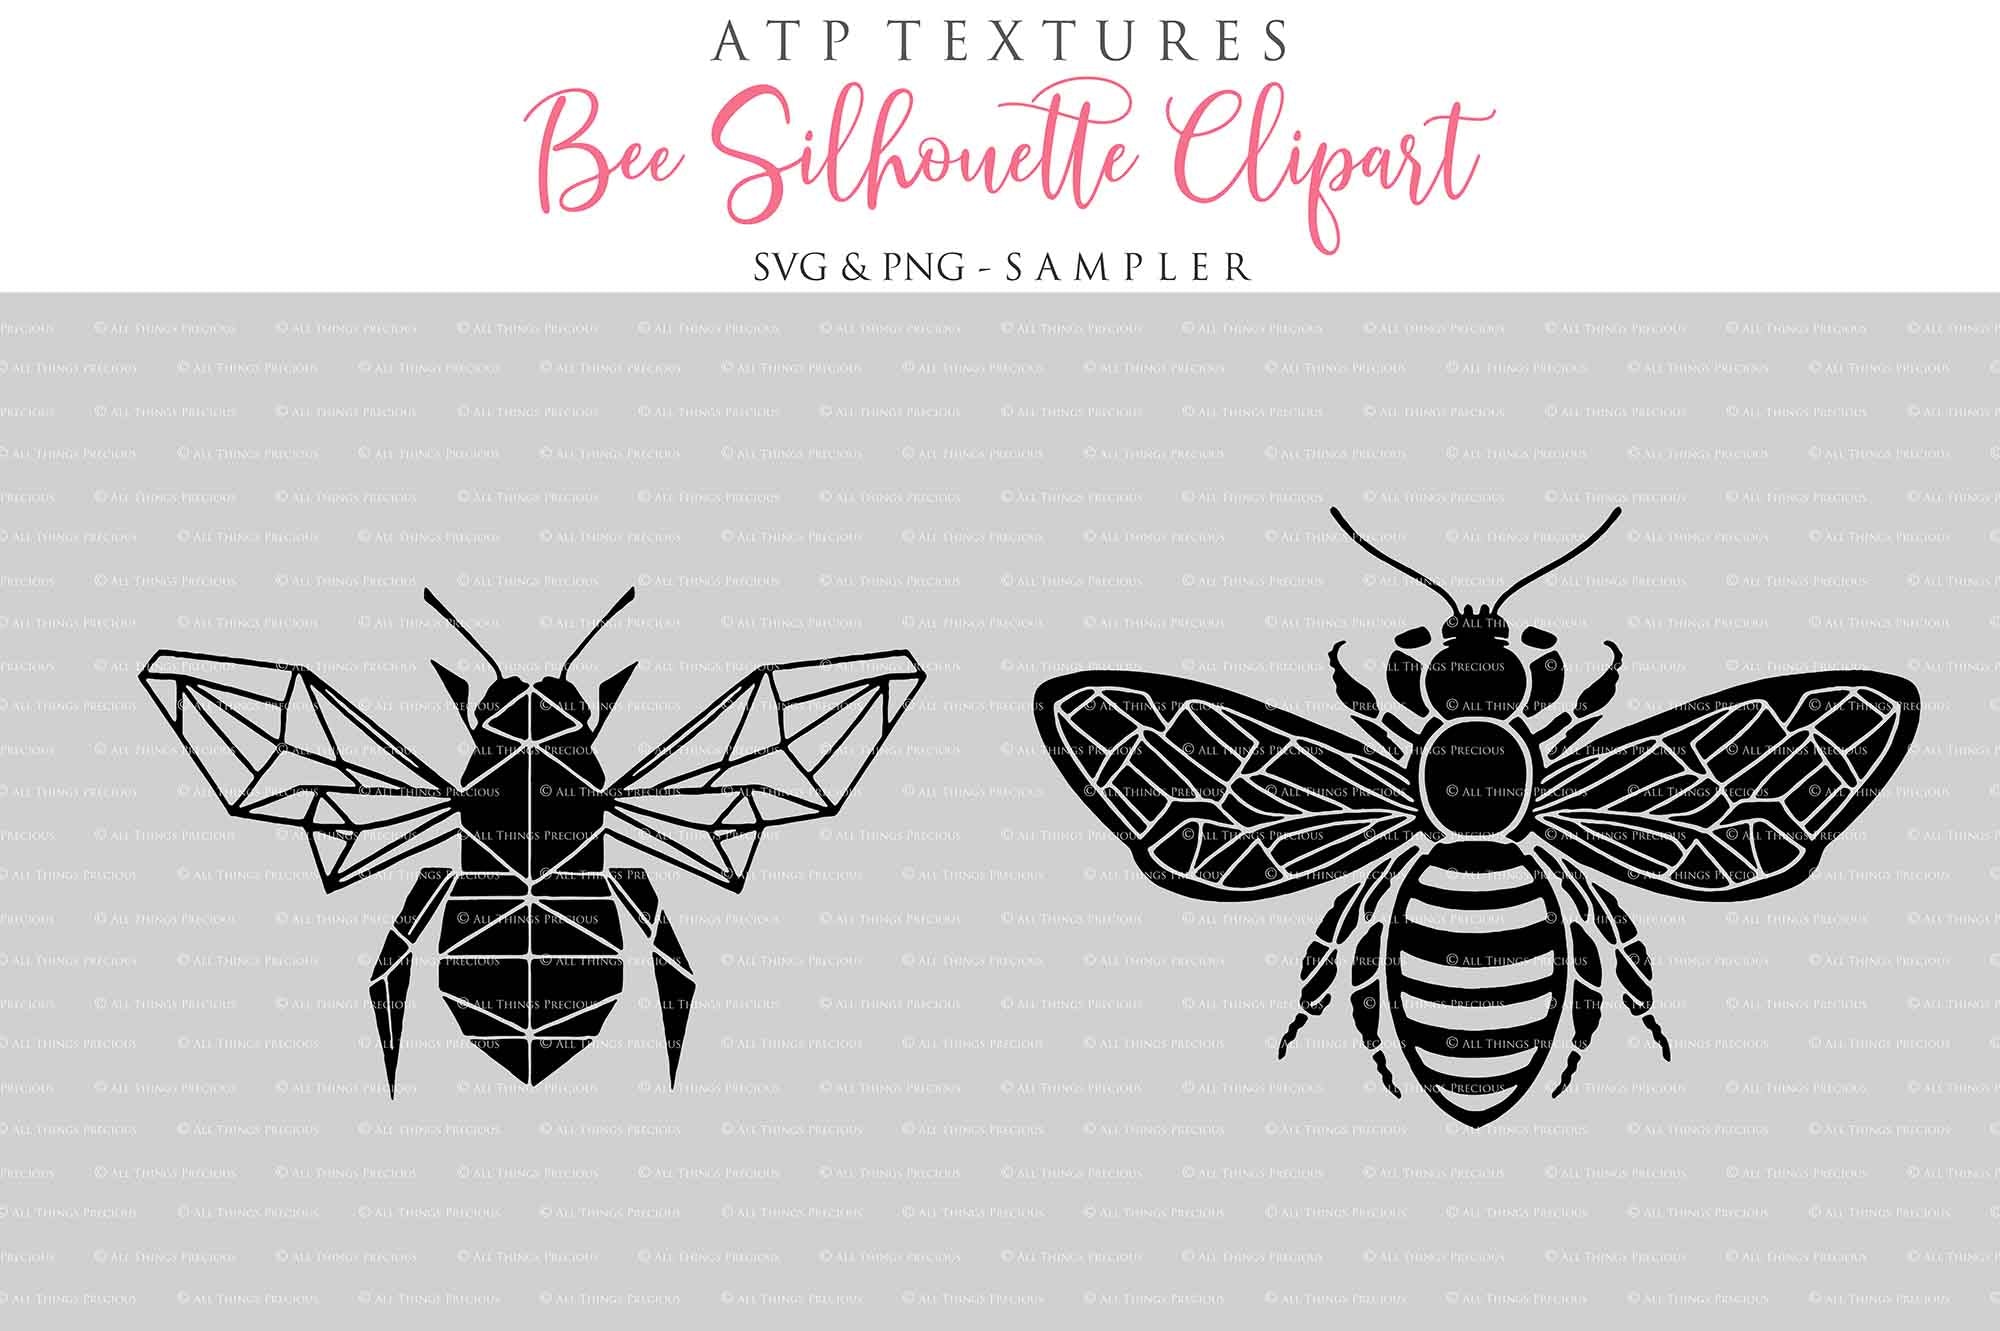 SVG Clipart for Cricut, Digital Art, Sublimation Print and Scrapbooking.Sweet Bees in High resolution.This is a digital product. This set includes 20 SVG & PNG Bee Clipart files. The PNG files are all in high resolution,300dpi.If you wish to use them for your fine art prints and photography edits without losing quality, you can!